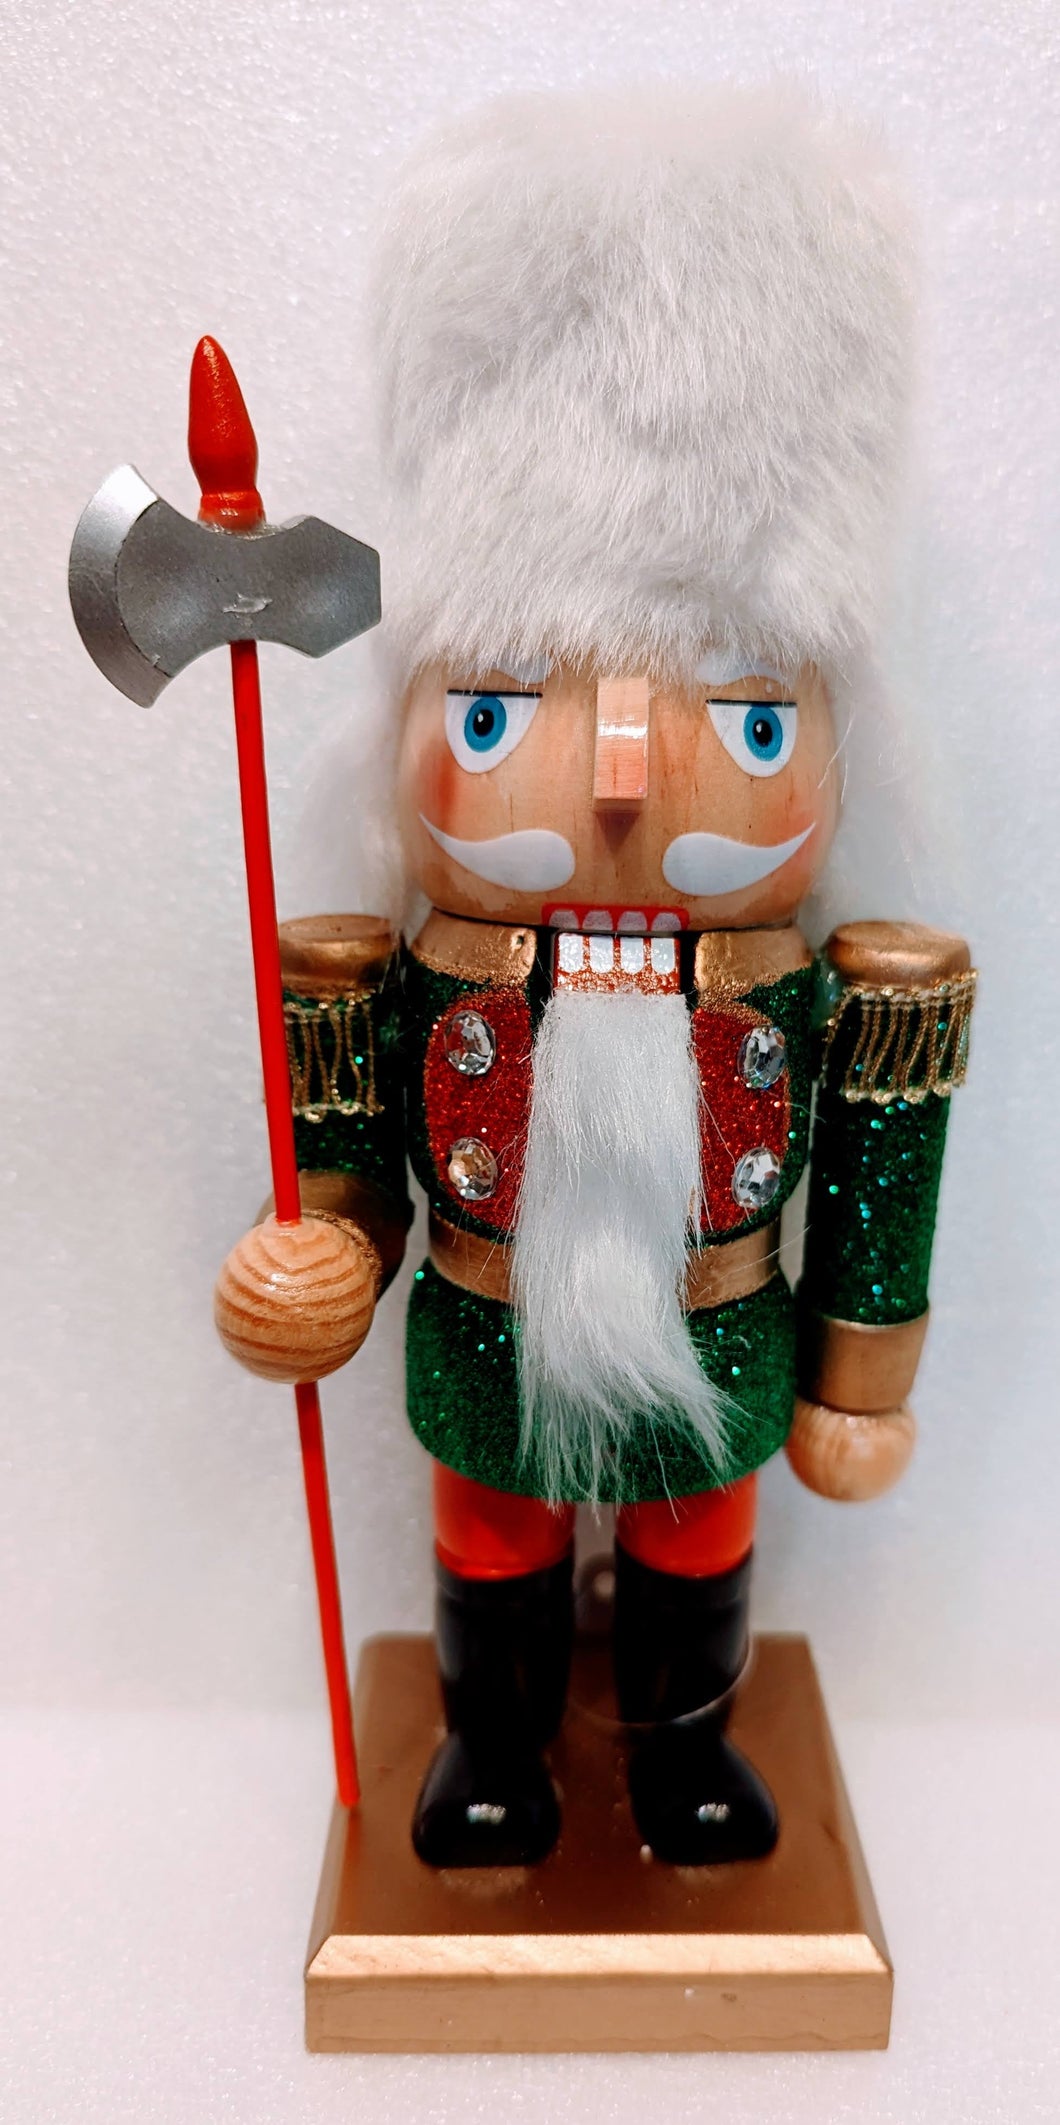 Green/Red/Gold Wooden Short Stack Nutcracker with White Fuzzy Hat & Staff